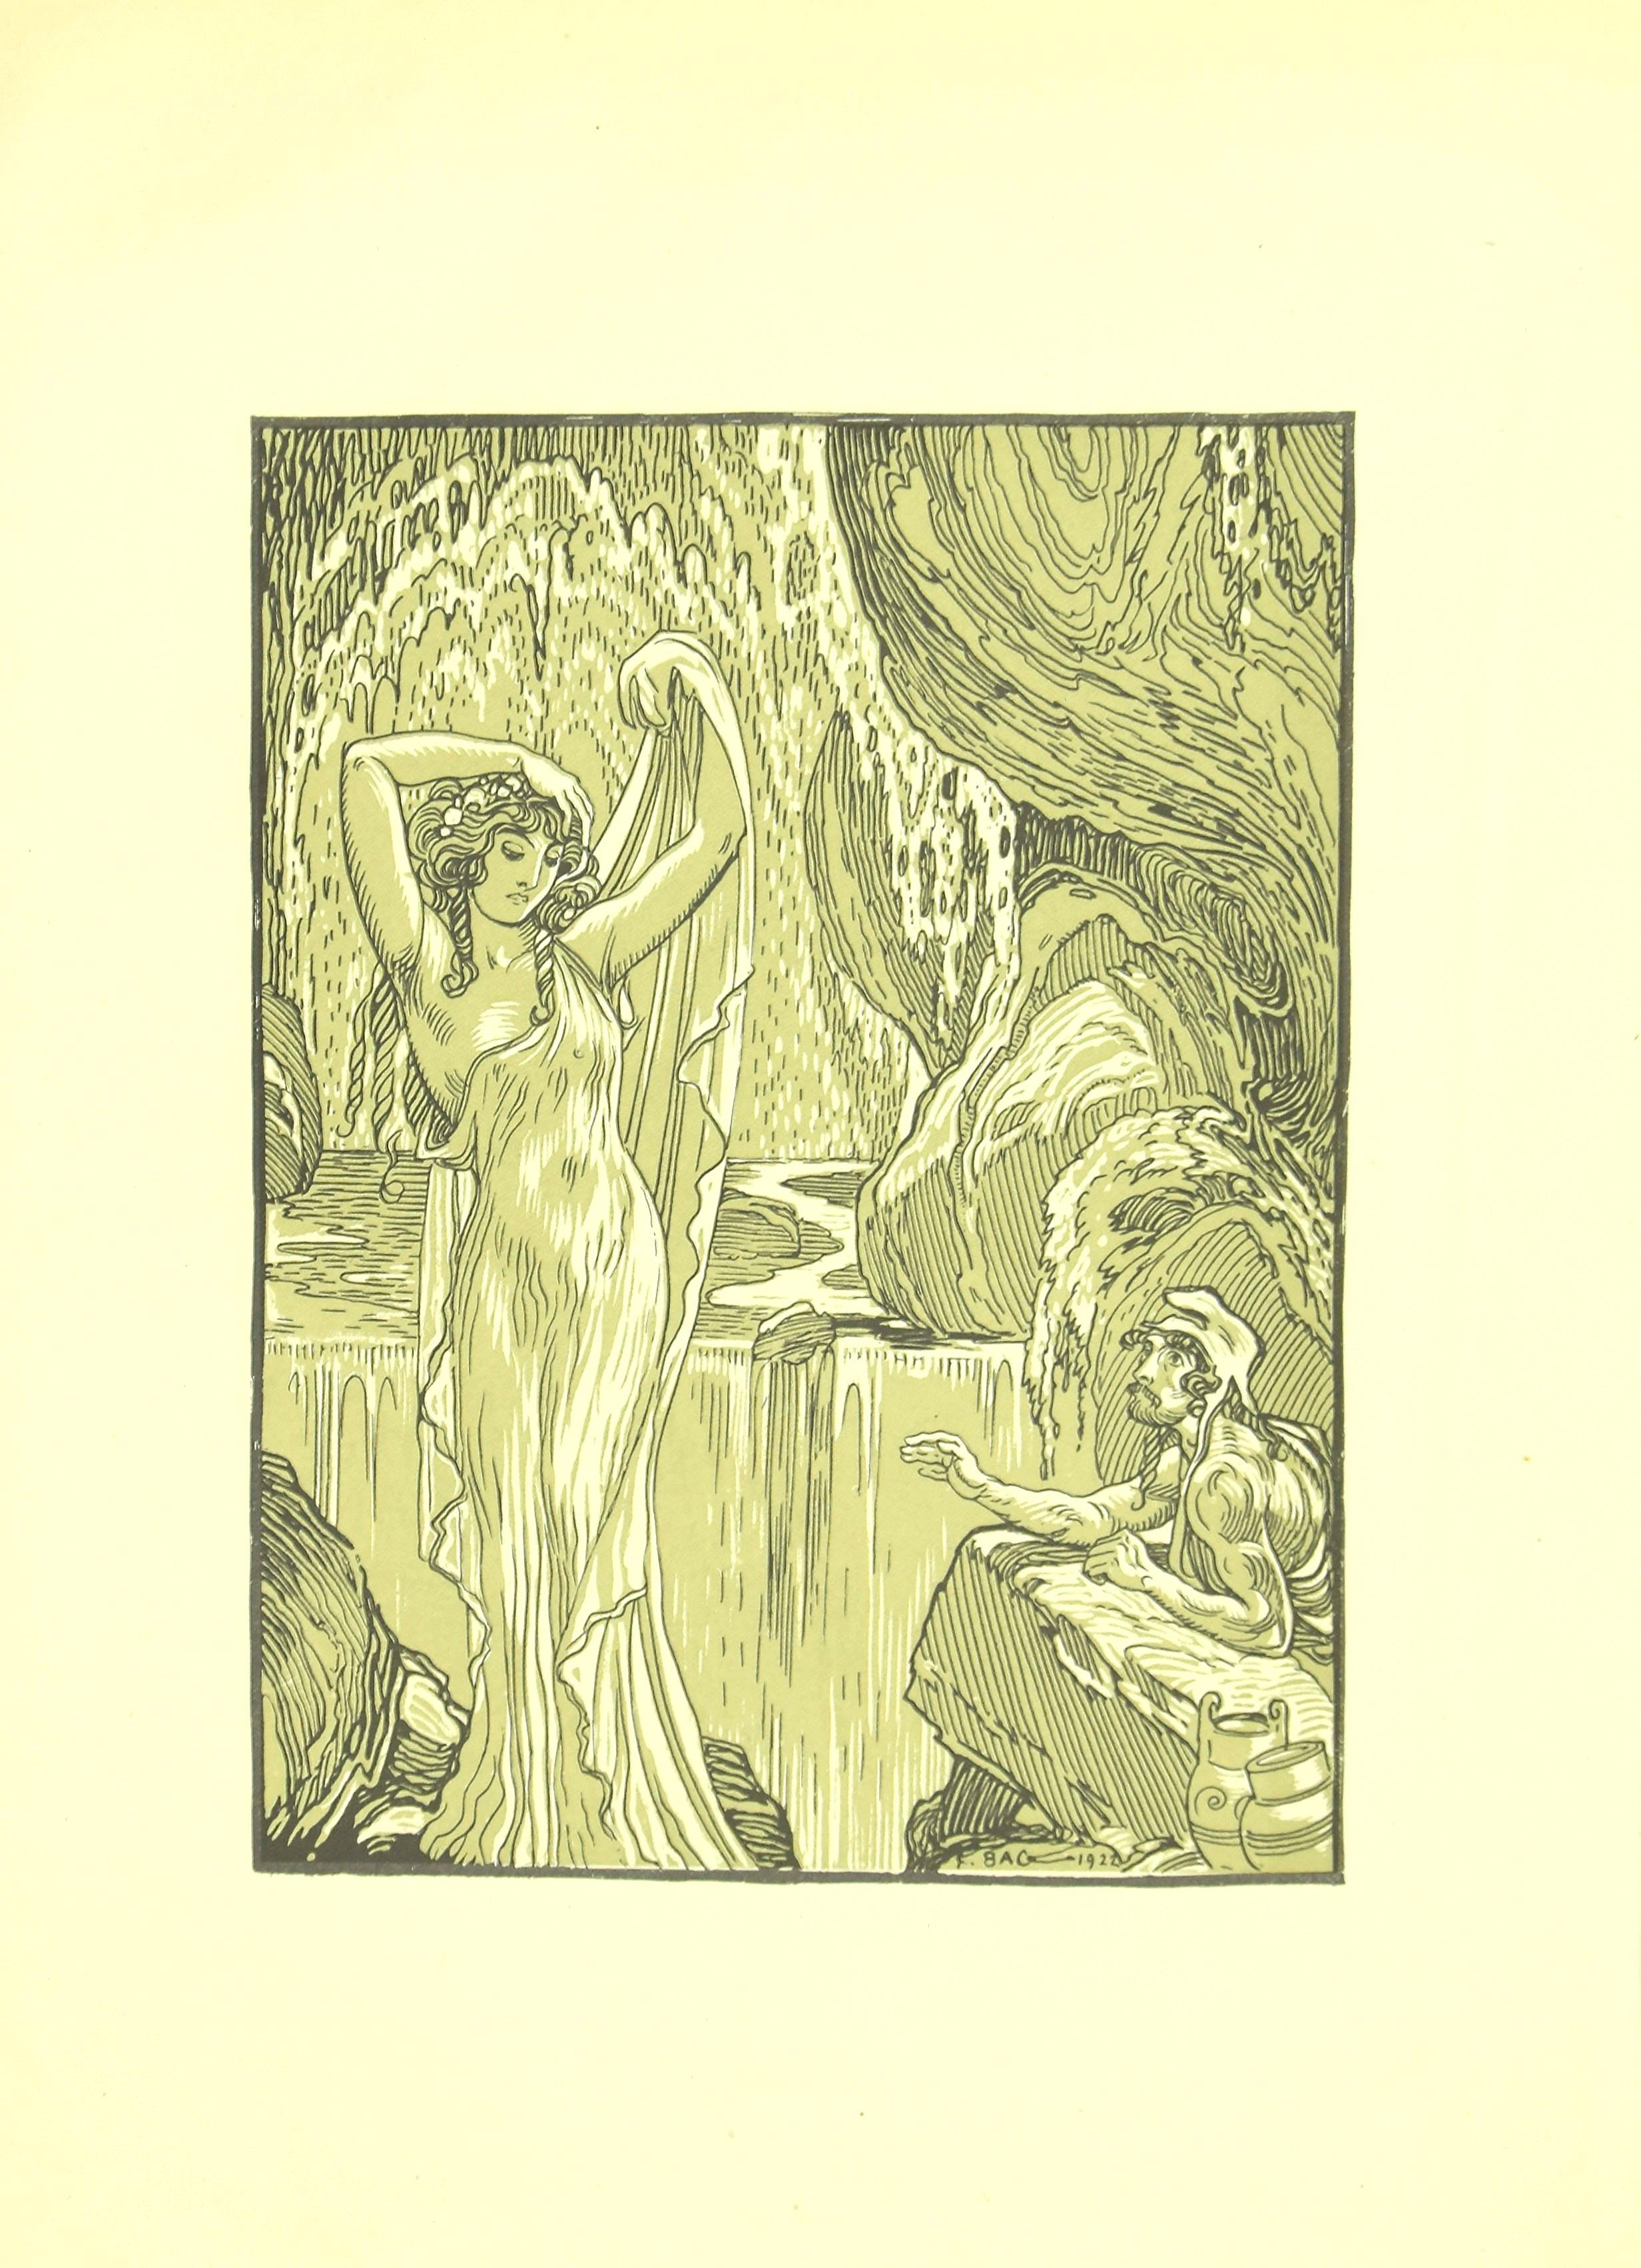 Ferdinand Bac Figurative Print - The Vestal in the Waterfall - Original Lithograph by F. Bac - 1922